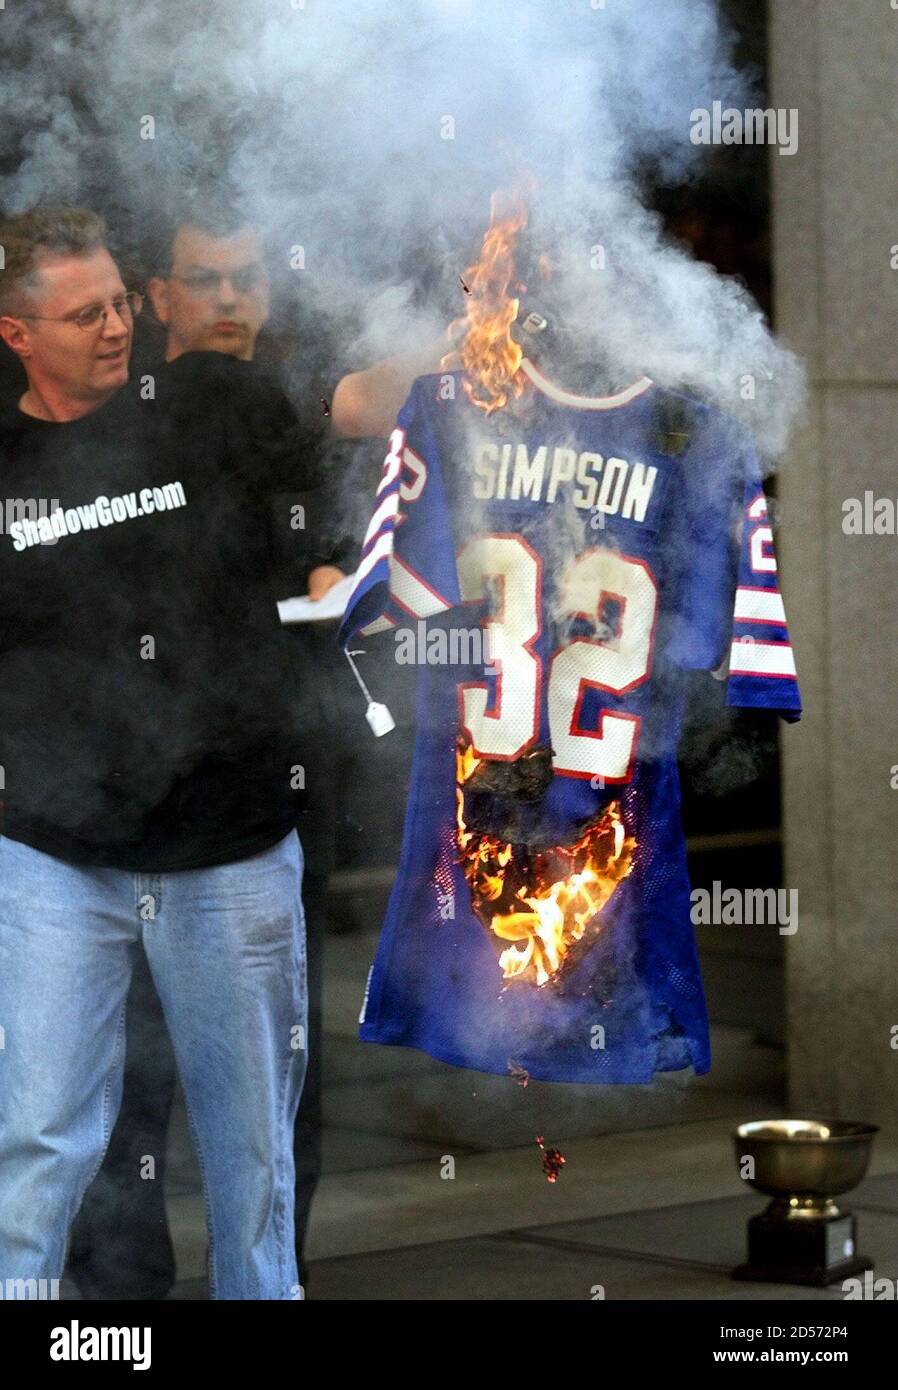 Protester Doug McBurney (L) holds a recently auctioned Buffalo Bills jersey  worn by O.J. Simpson, purchased by Denver talk show host Bob Enyart (C),  during a public burning of Simpson memorabilia at